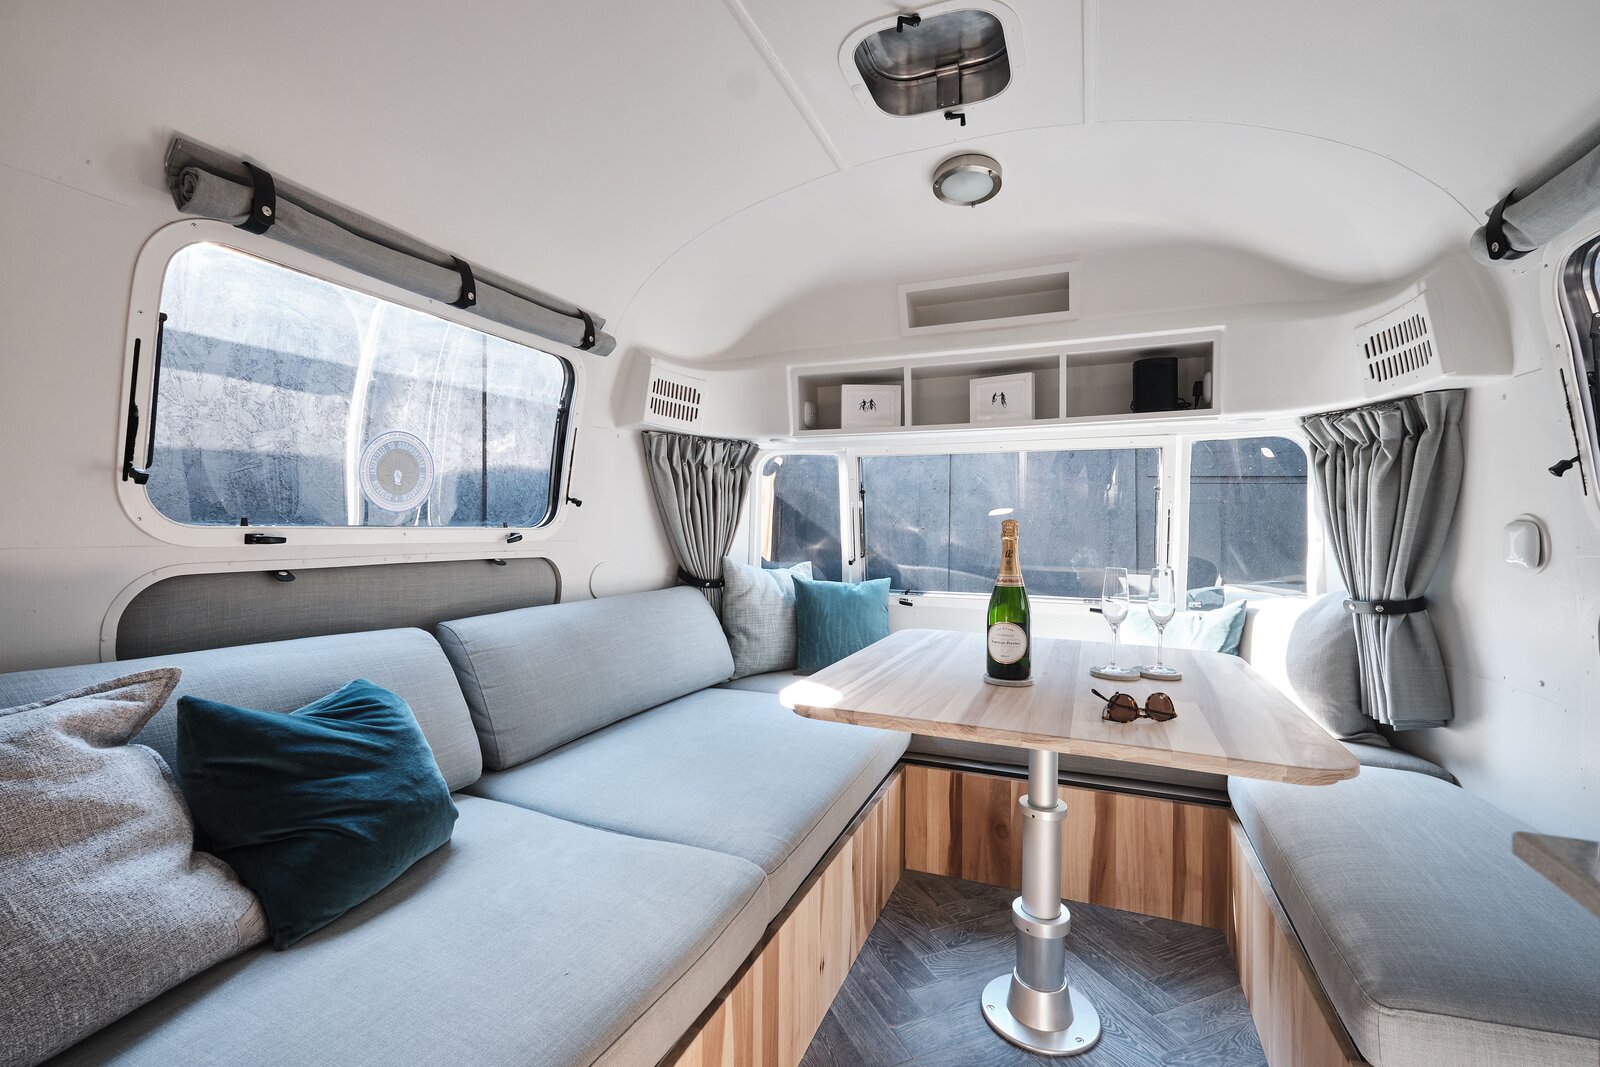 Scoop Up This Revamped 1974 Airstream in London